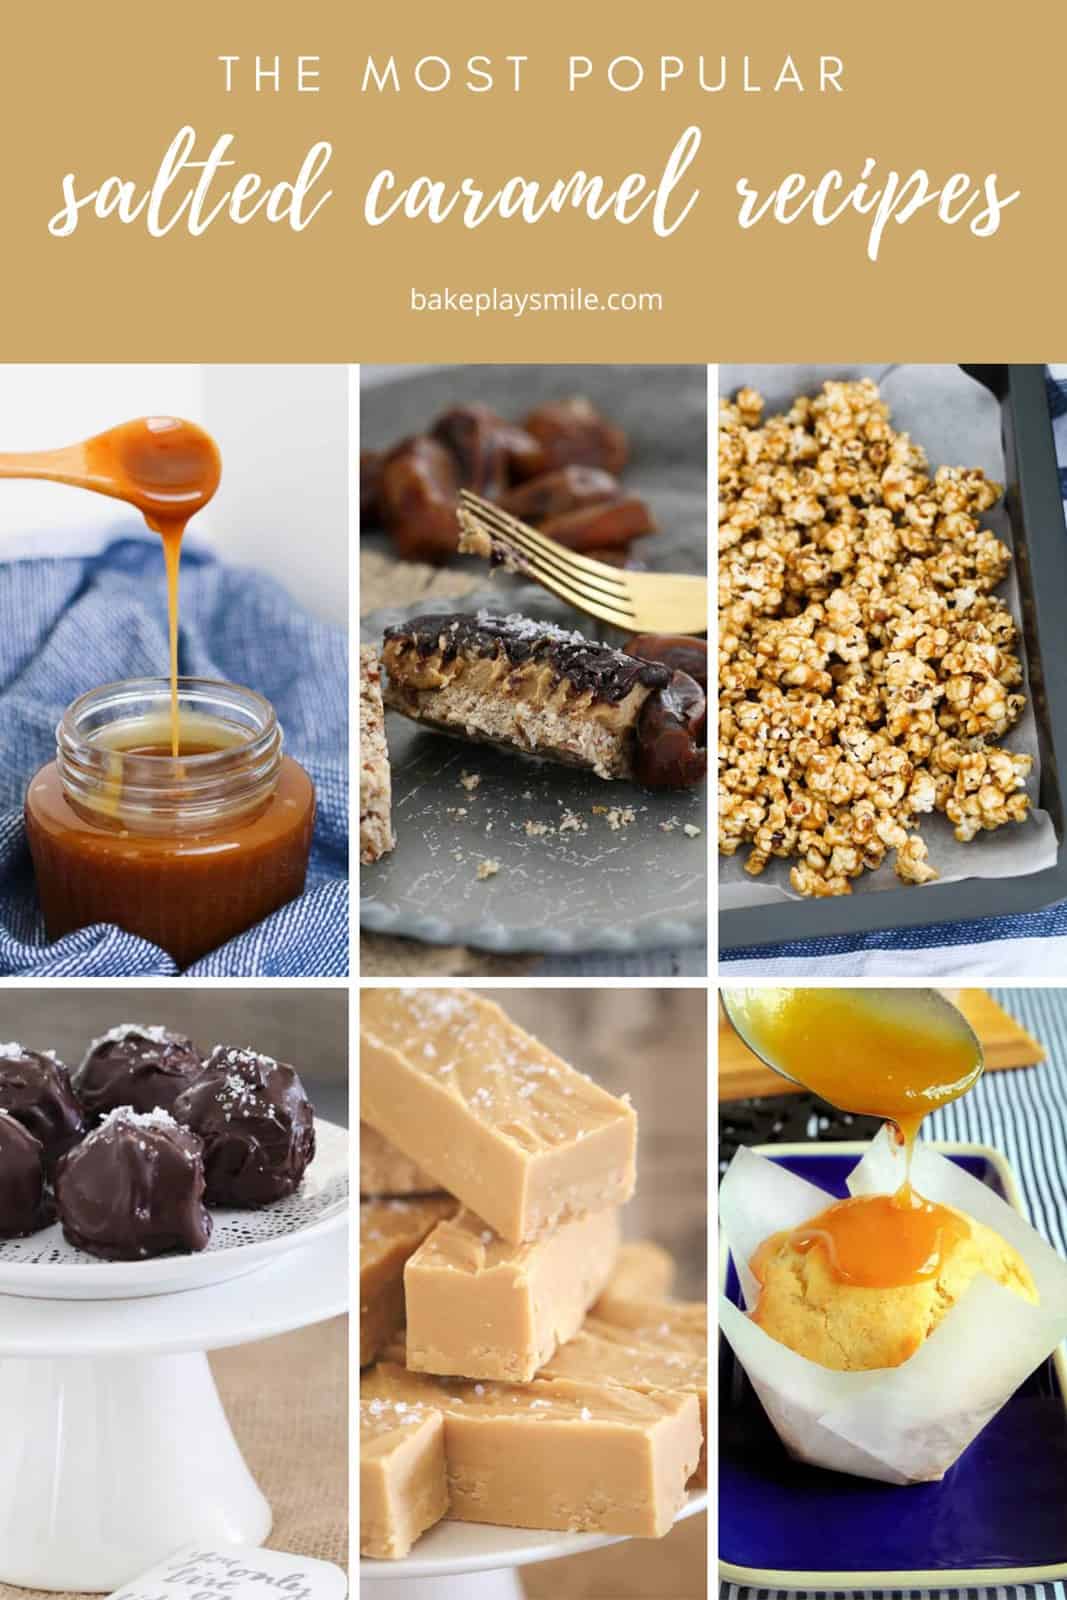 A collage of images showing salted caramel inspired desserts, cakes, slices and sauce.